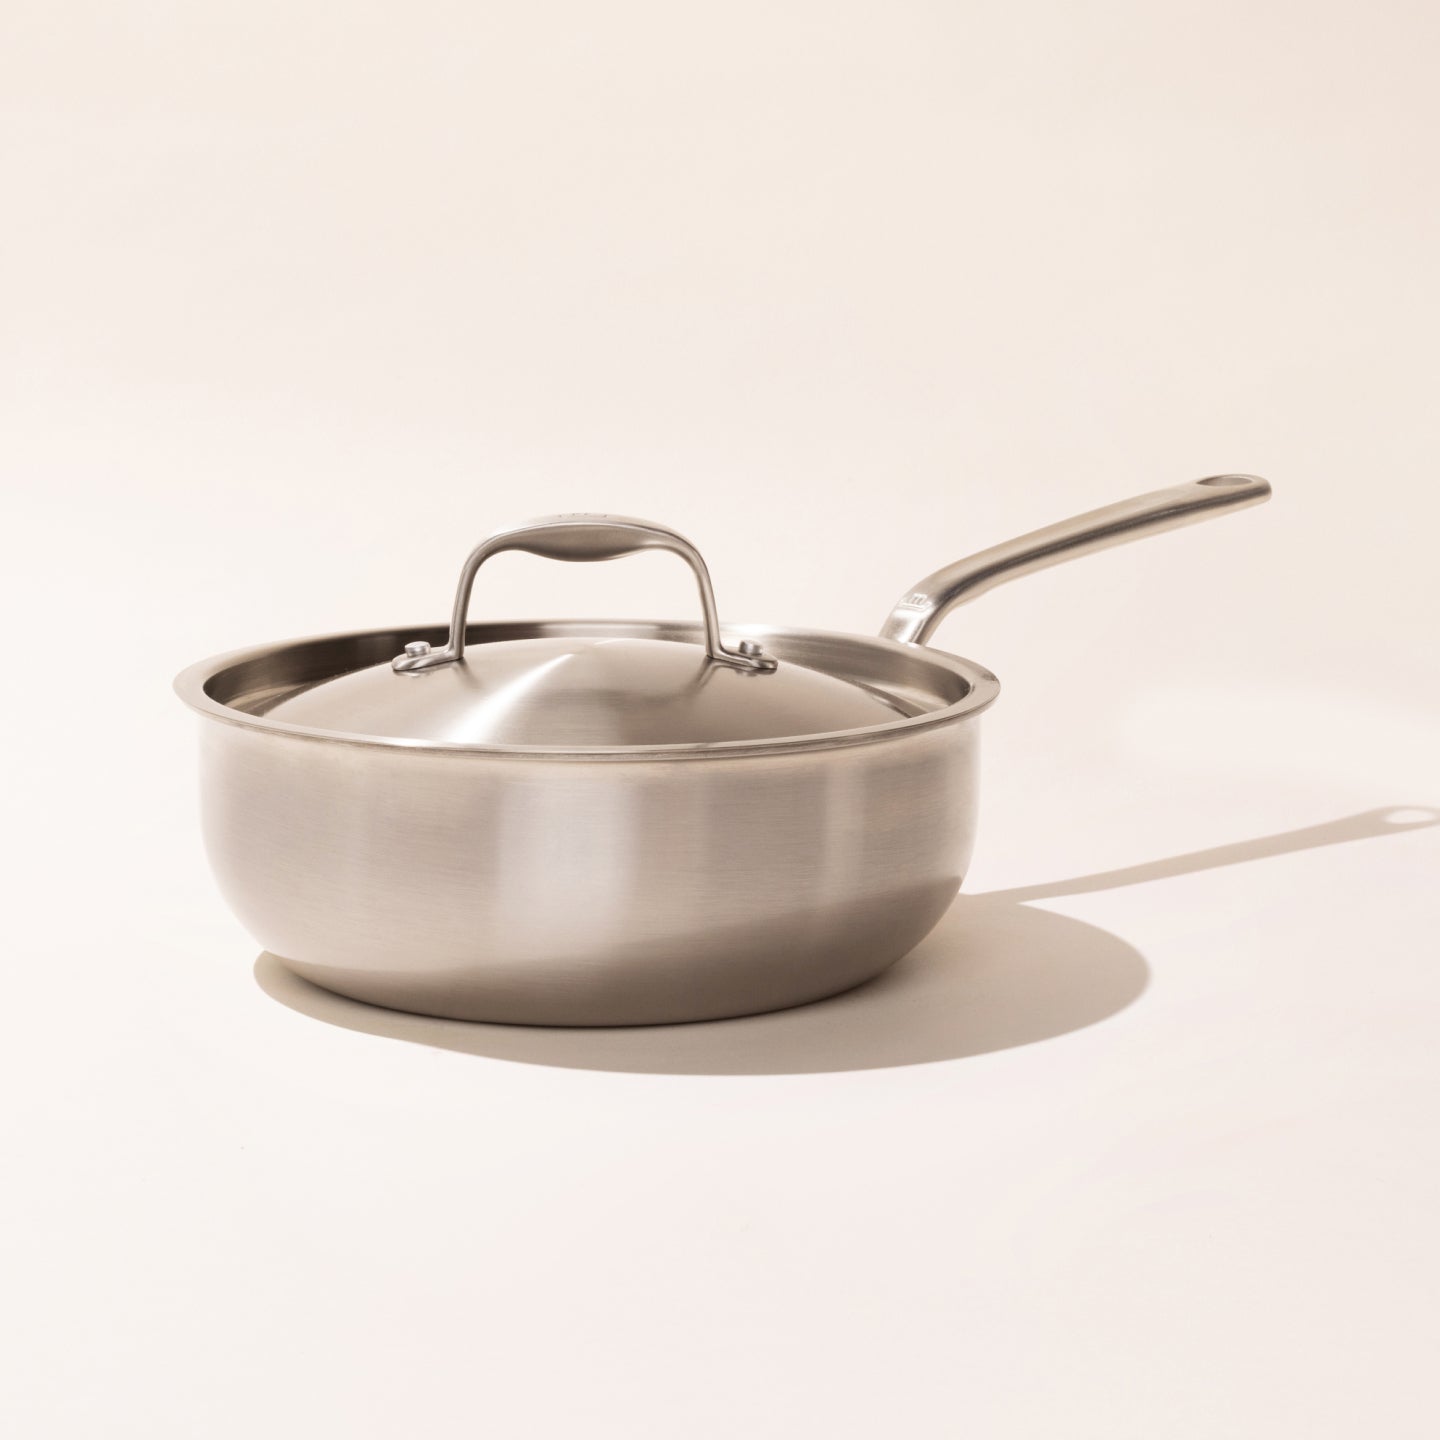 American Kitchen Cookware - 3 Qt. Covered Saucepan / Stainless Steel